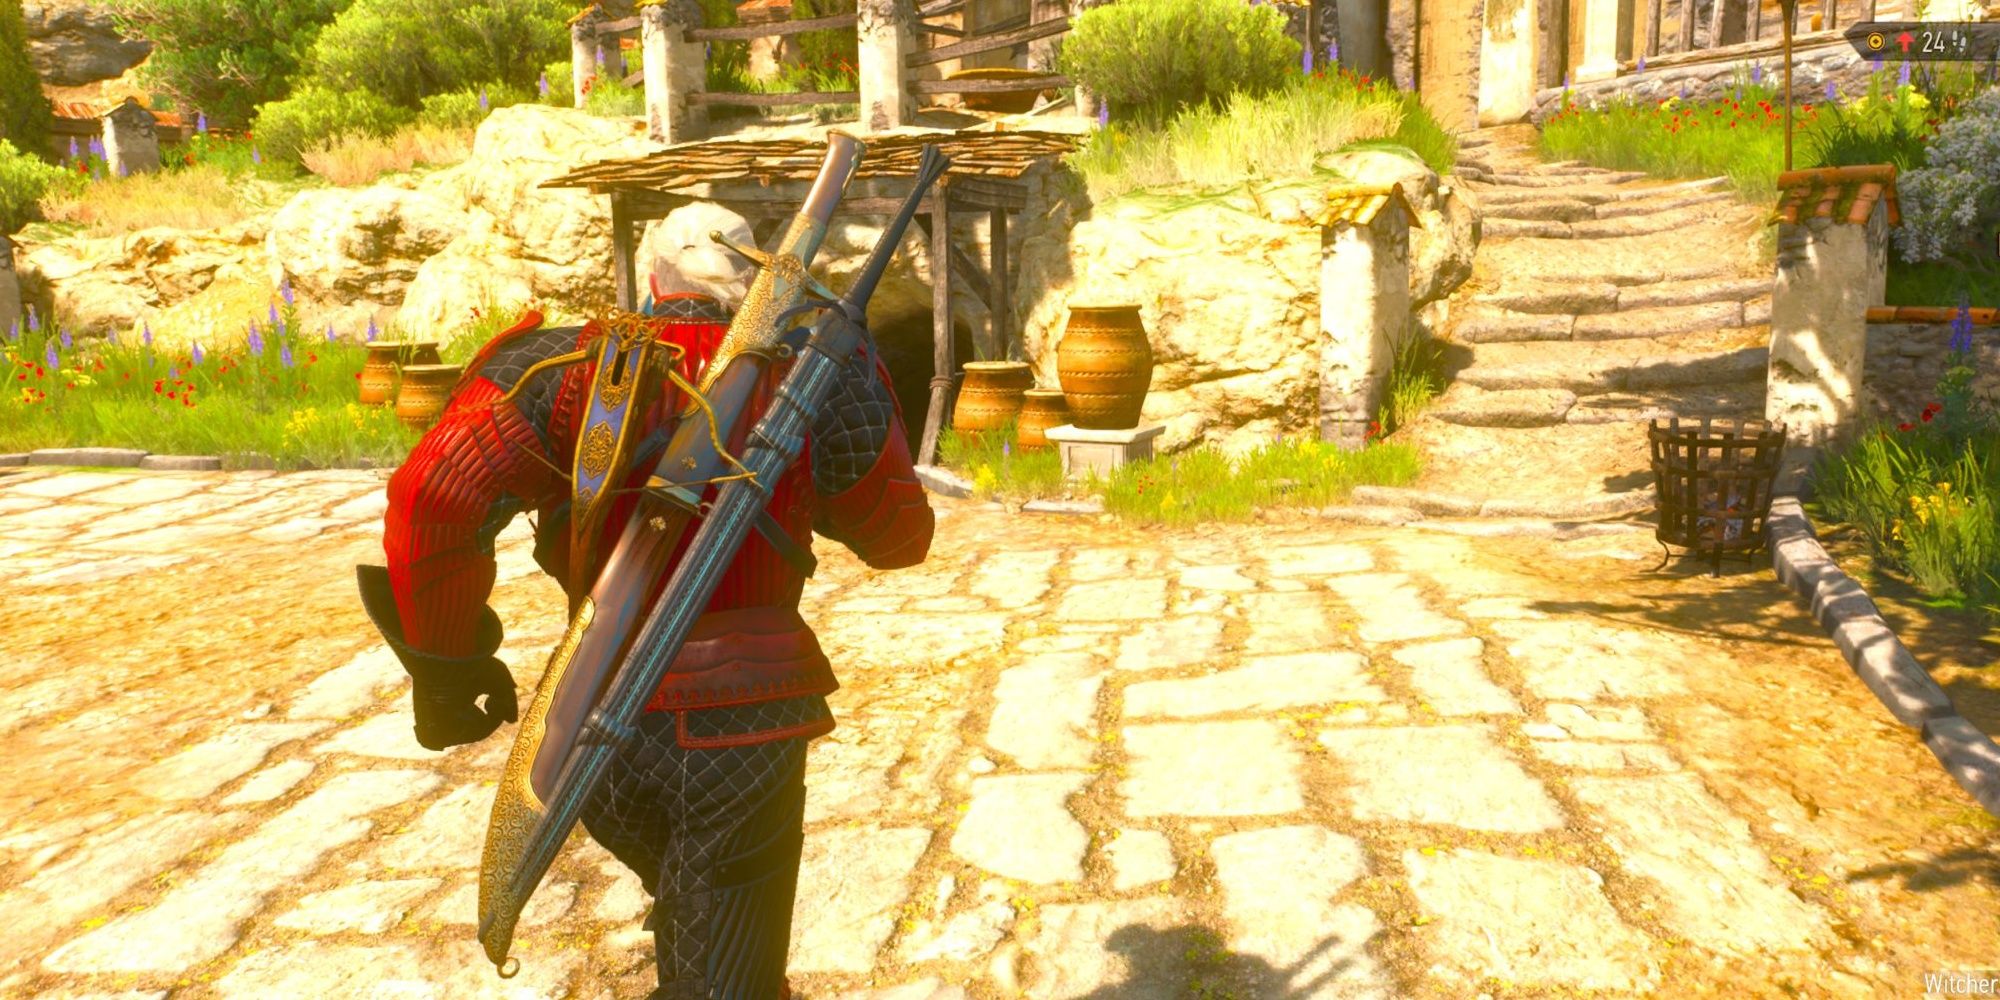 Geralt going through a key area in Witcher 3's Blood and Wine expansion.